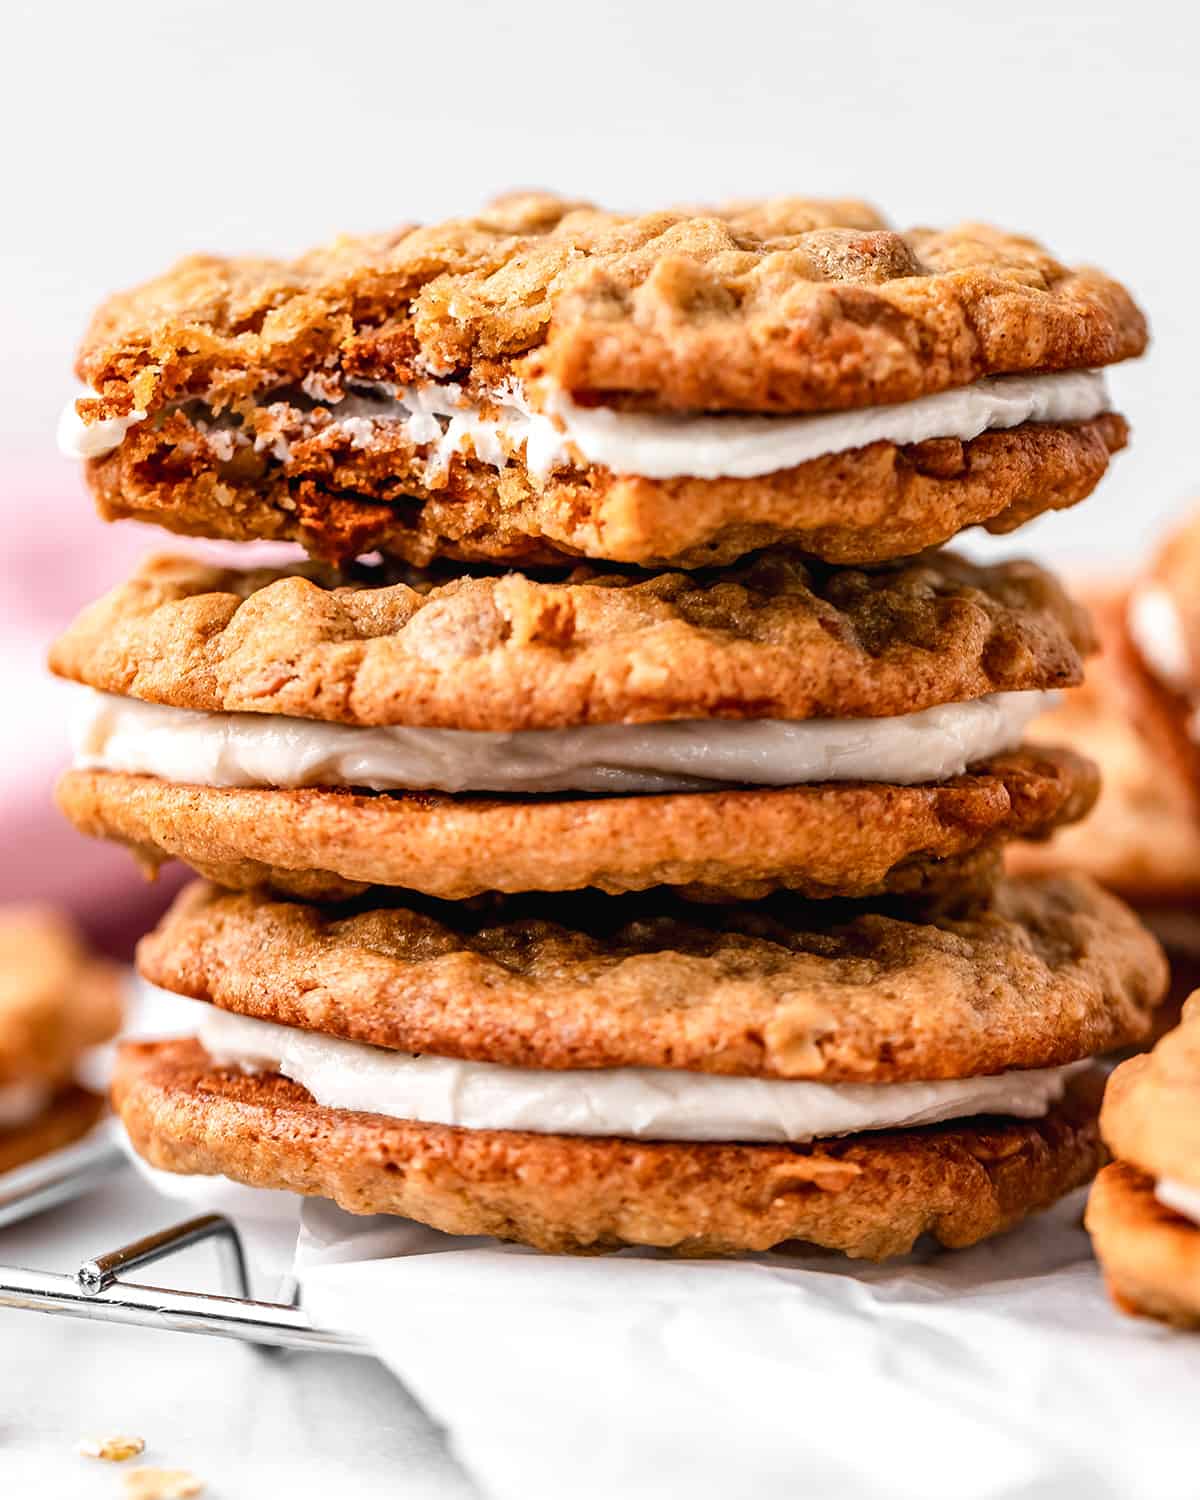 a stack of 3 Homemade Oatmeal Cream Pies, the top one with a bite taken out of it